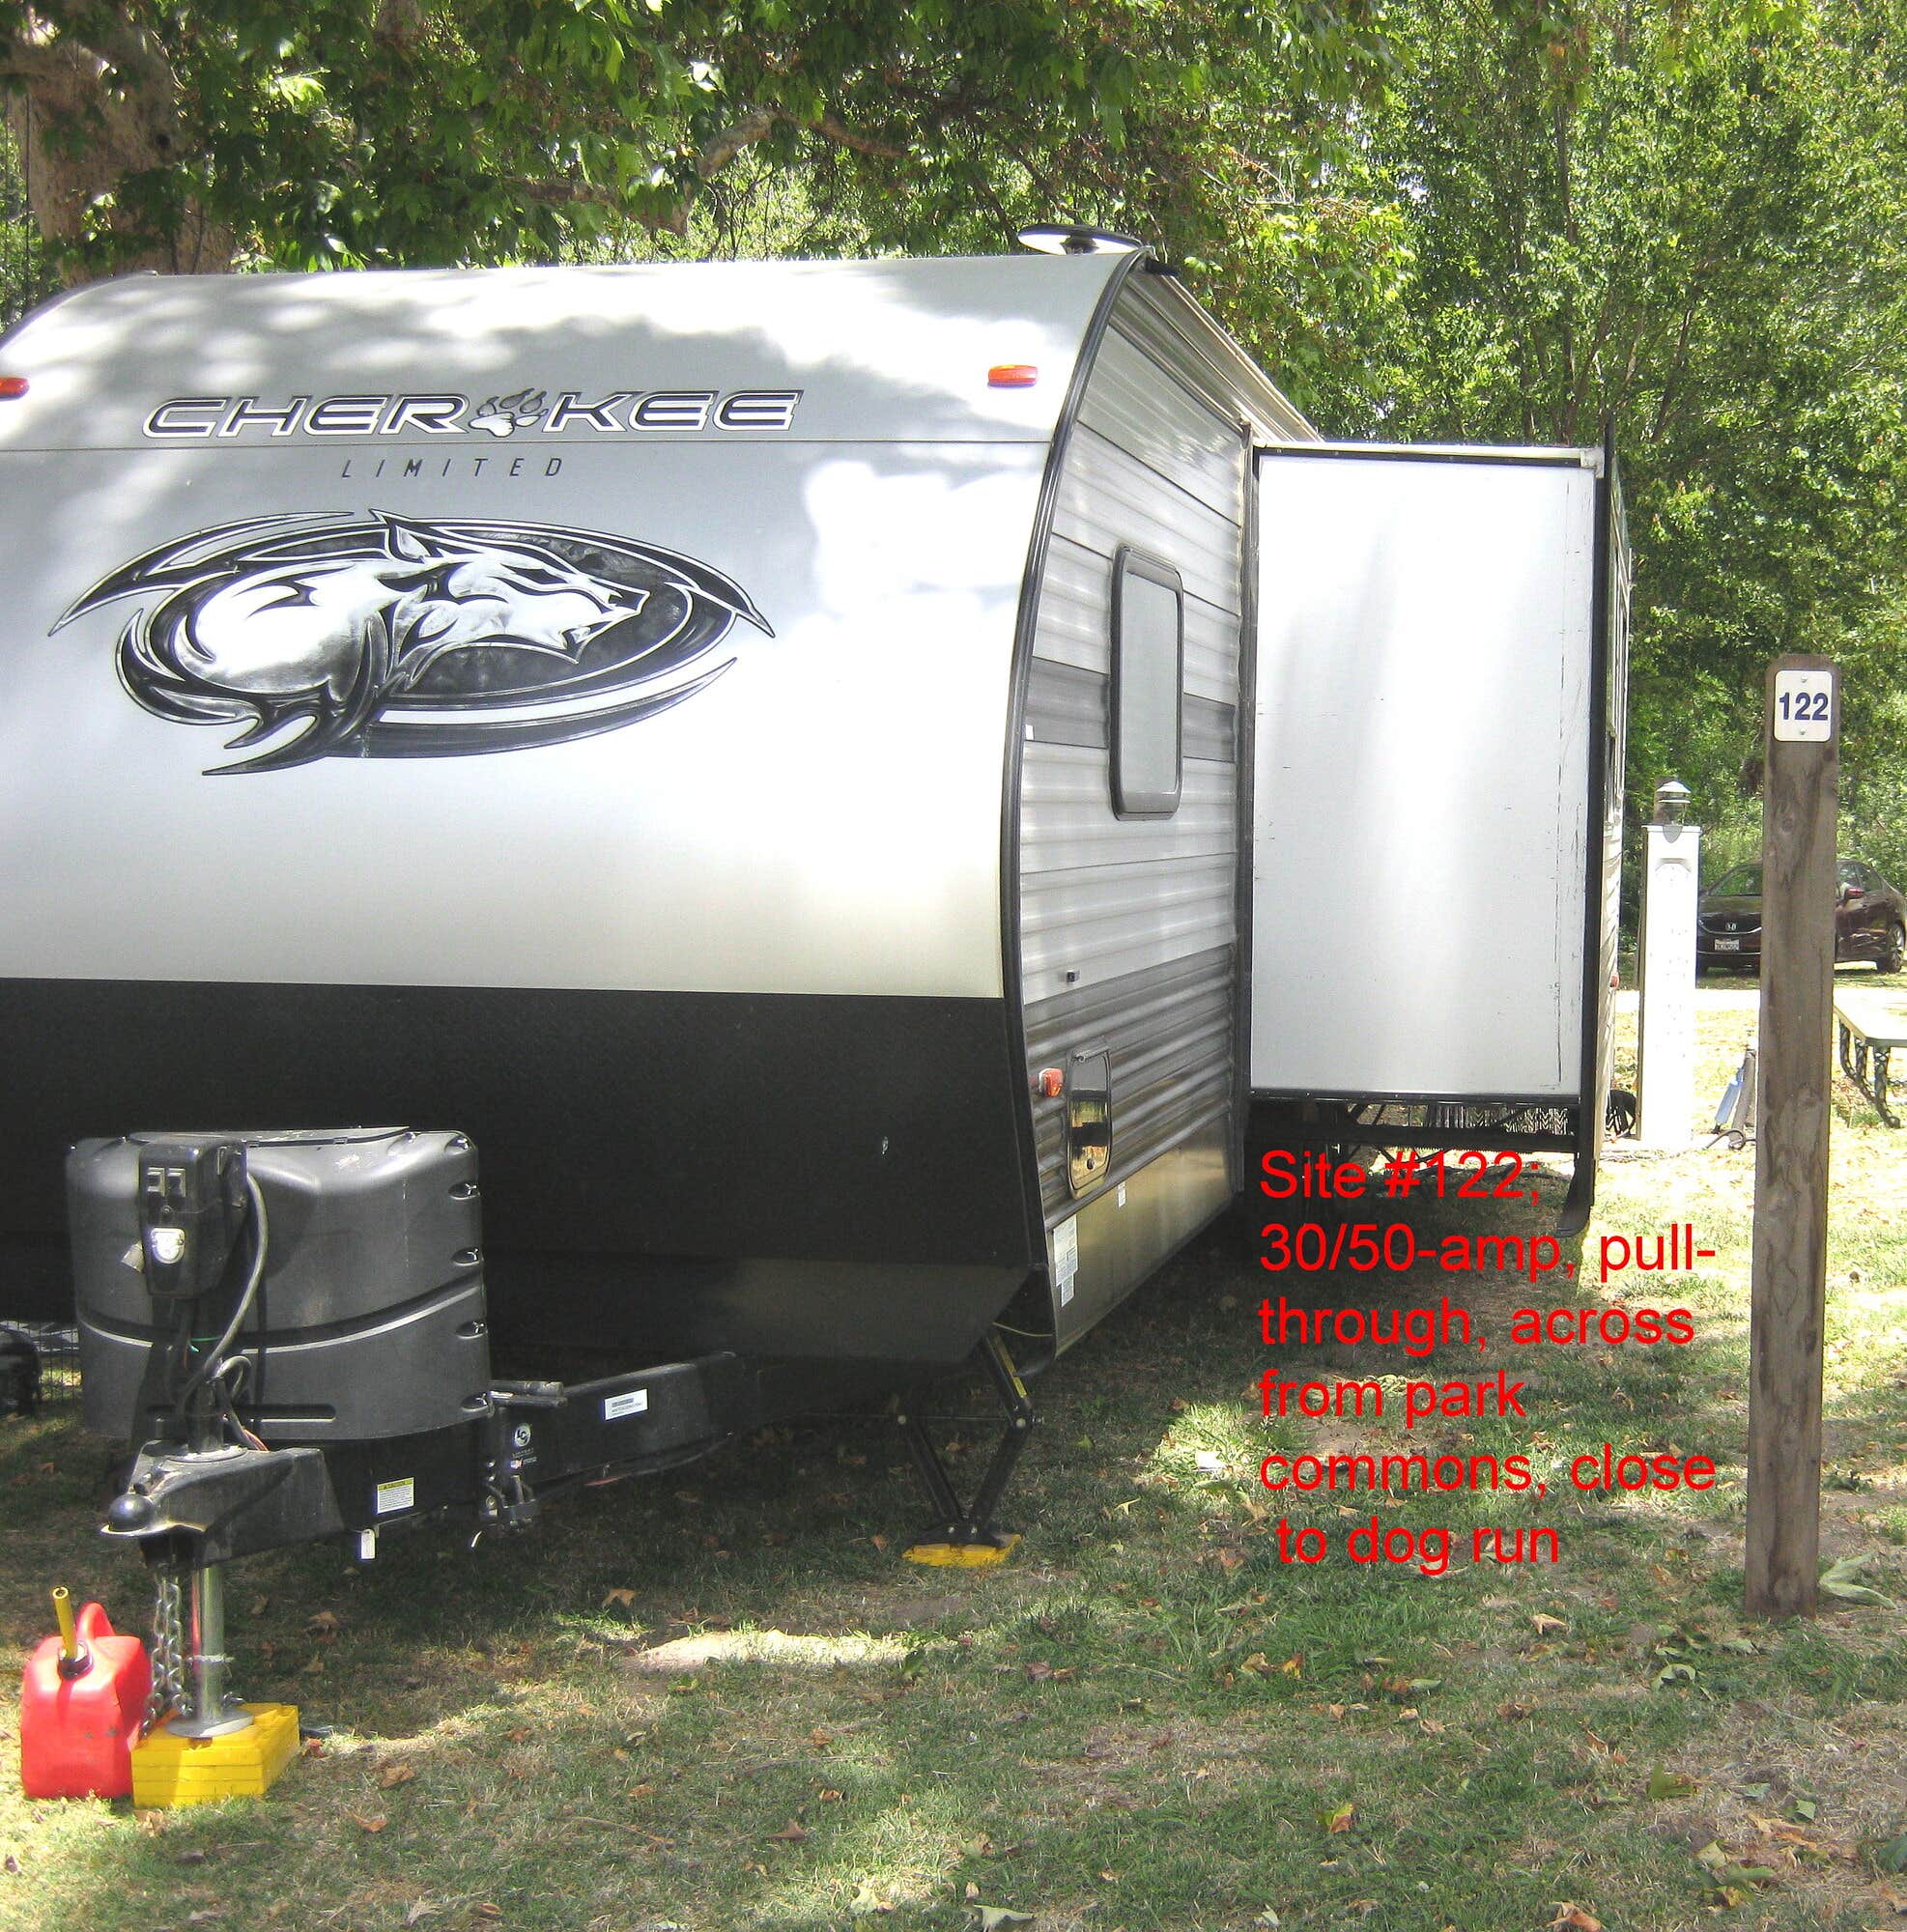 Camper submitted image from Riverbend RV Park - 2